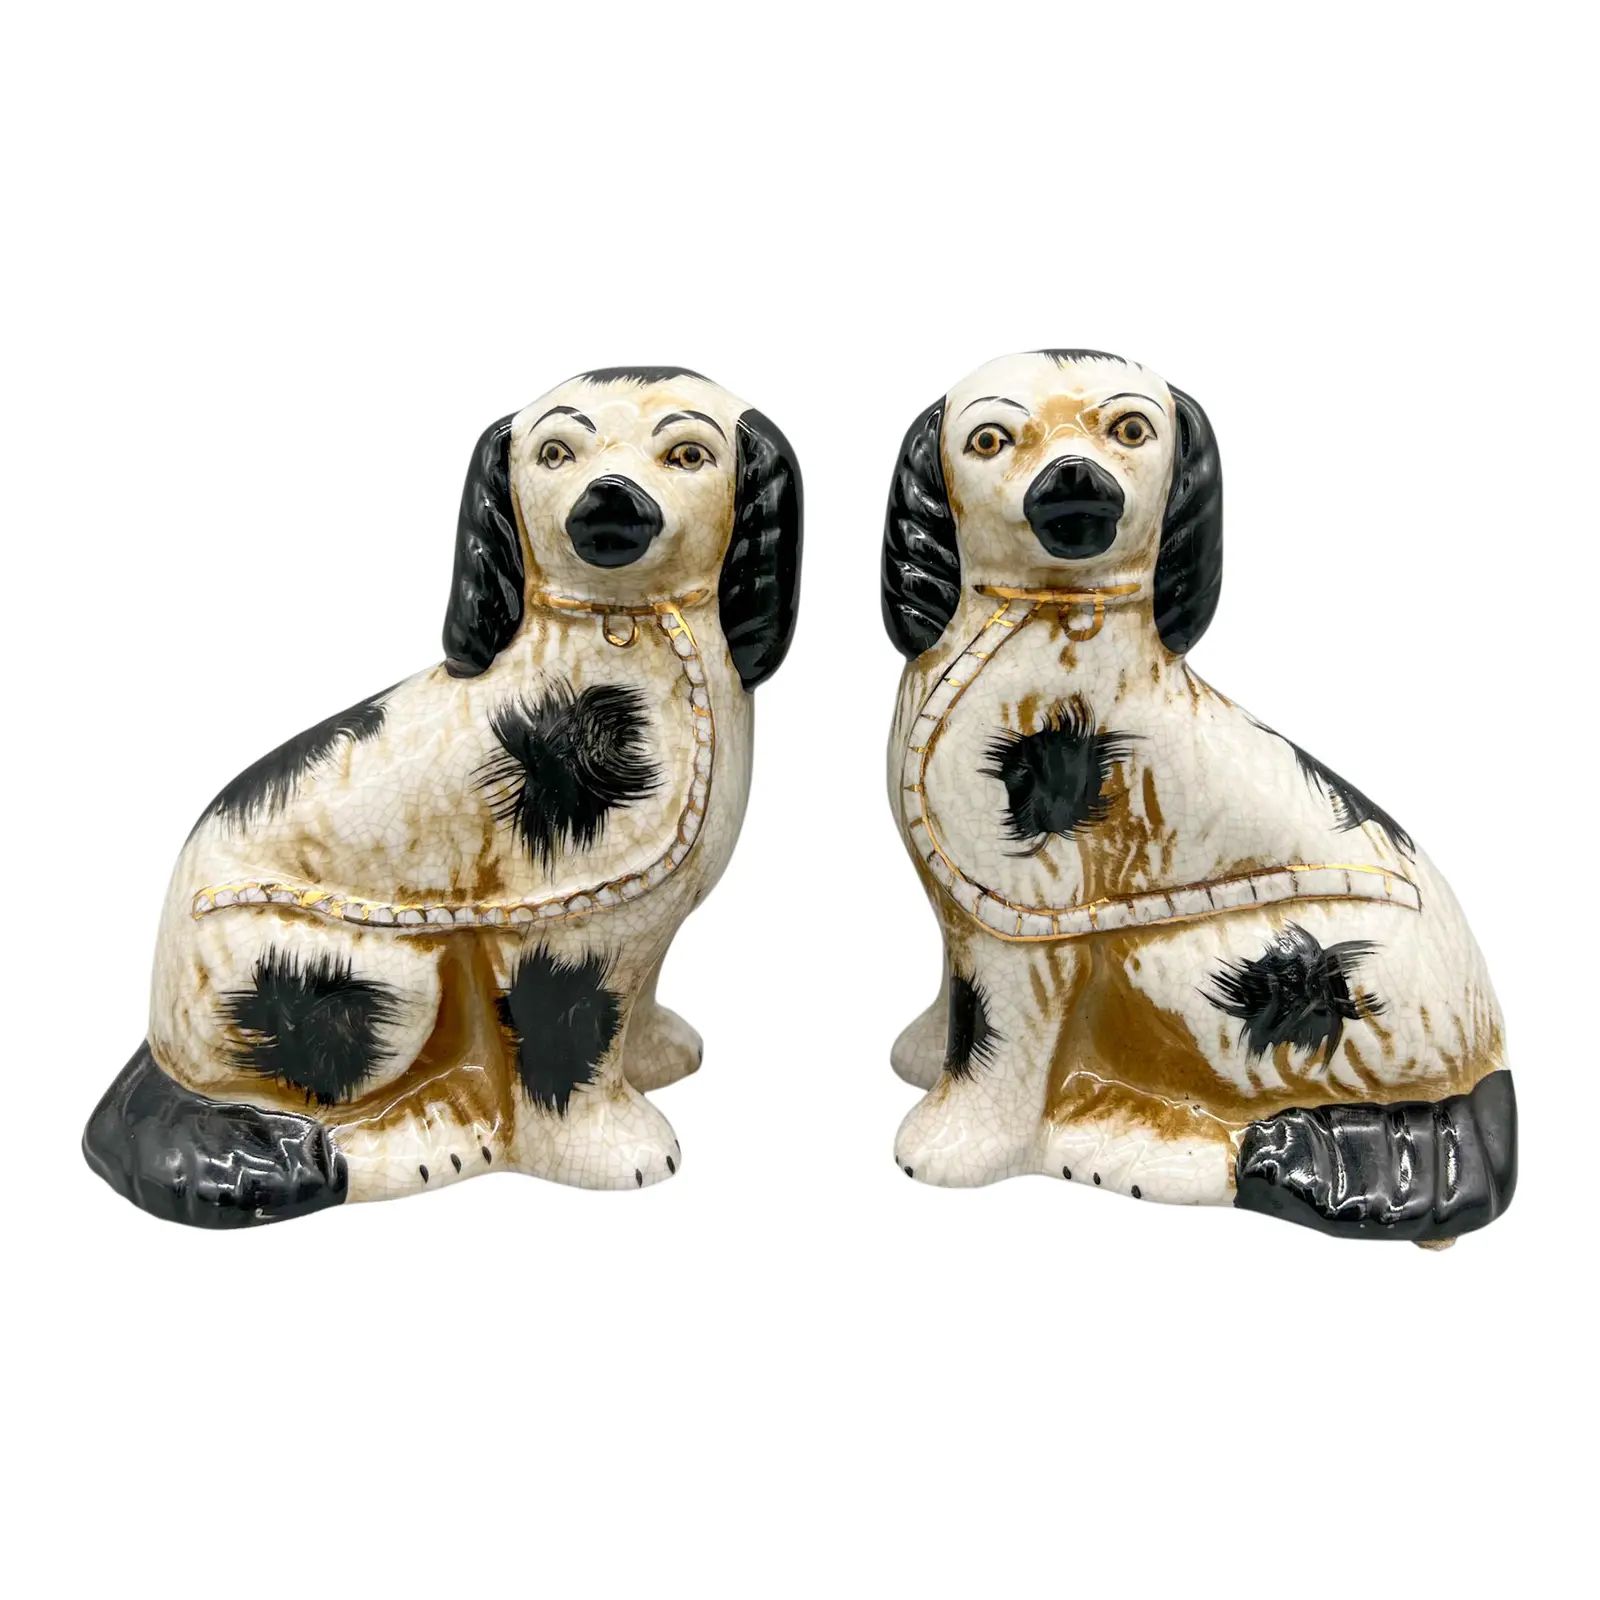 20th Century Staffordshire White and Black Spaniel Dogs - a Pair | Chairish